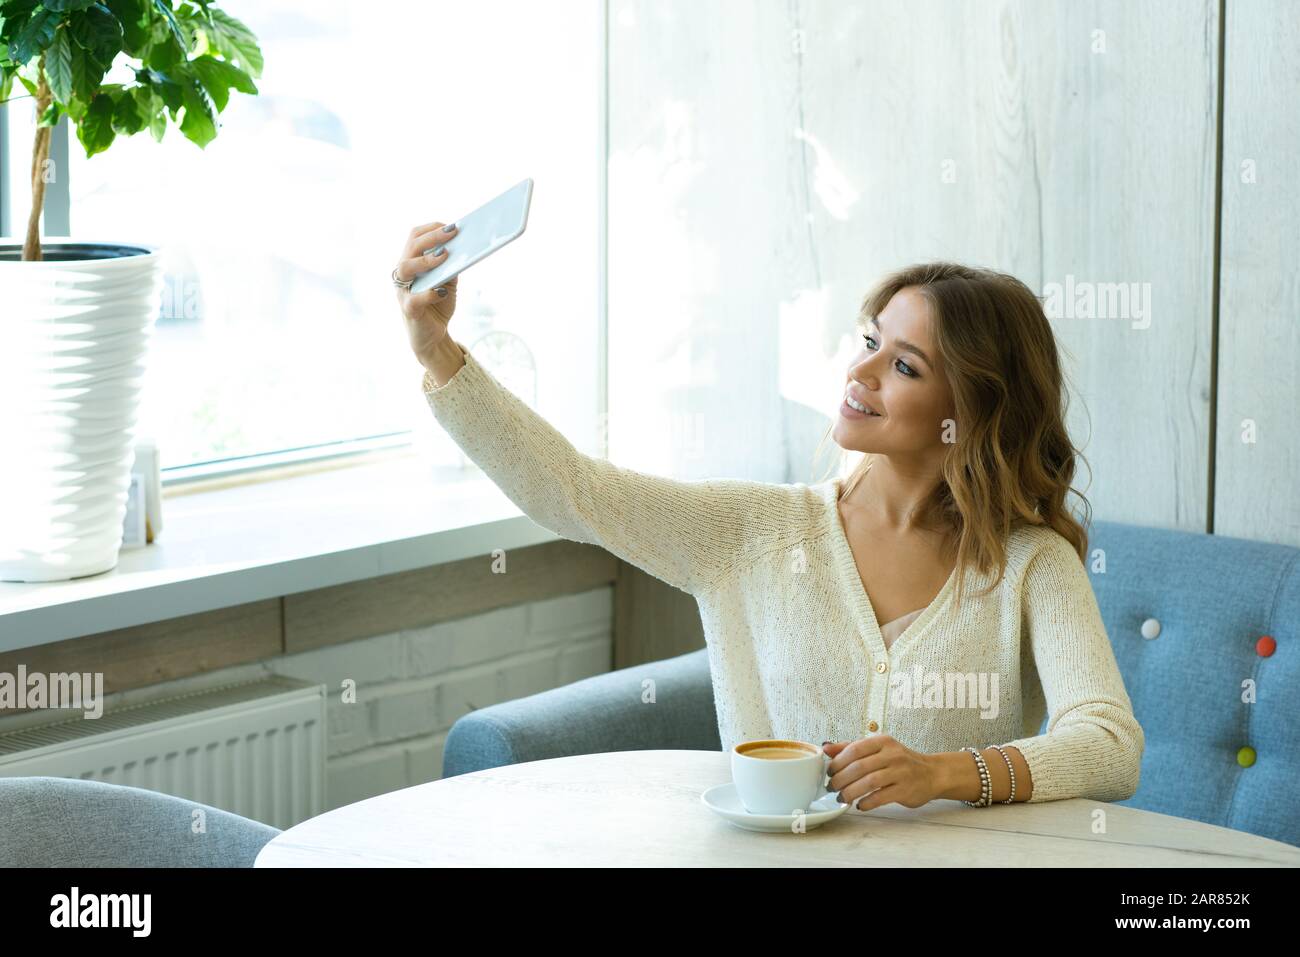 Pretty young smiling woman with smartphone making selfie while resting in cafe Stock Photo